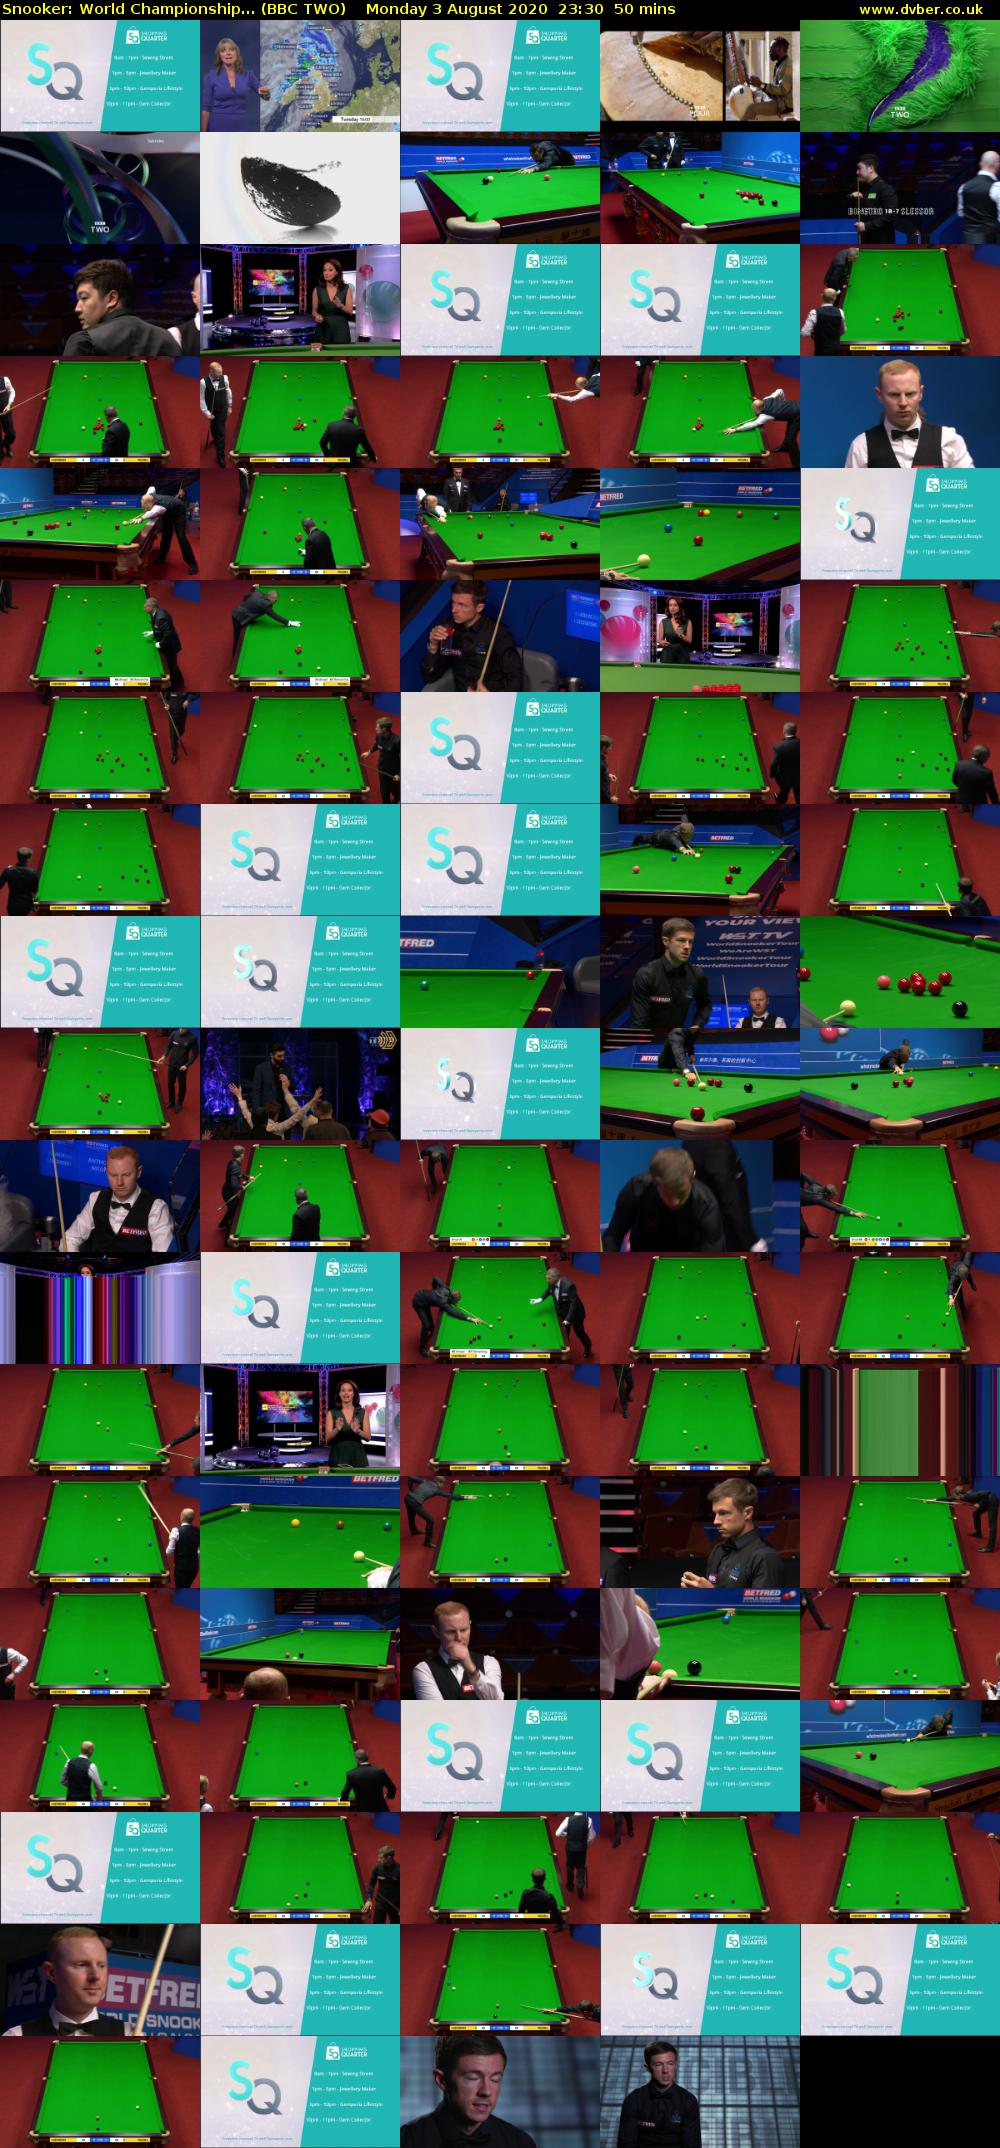 Snooker: World Championship... (BBC TWO) Monday 3 August 2020 23:30 - 00:20